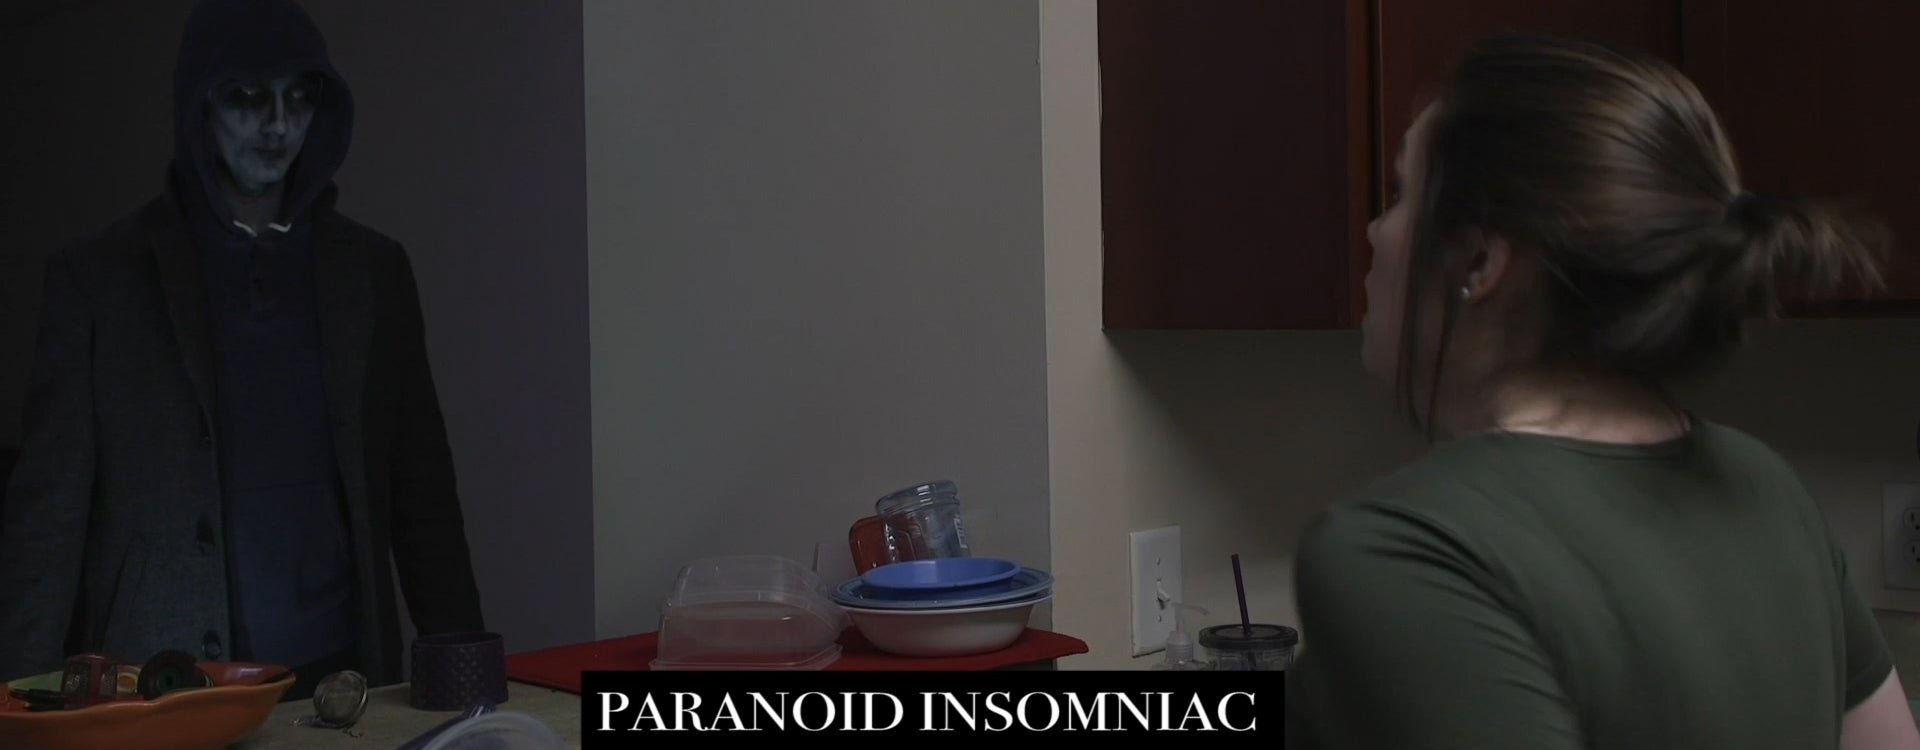 A video still from "Paranoid Insomniac" features hallucinations the main character experiences.